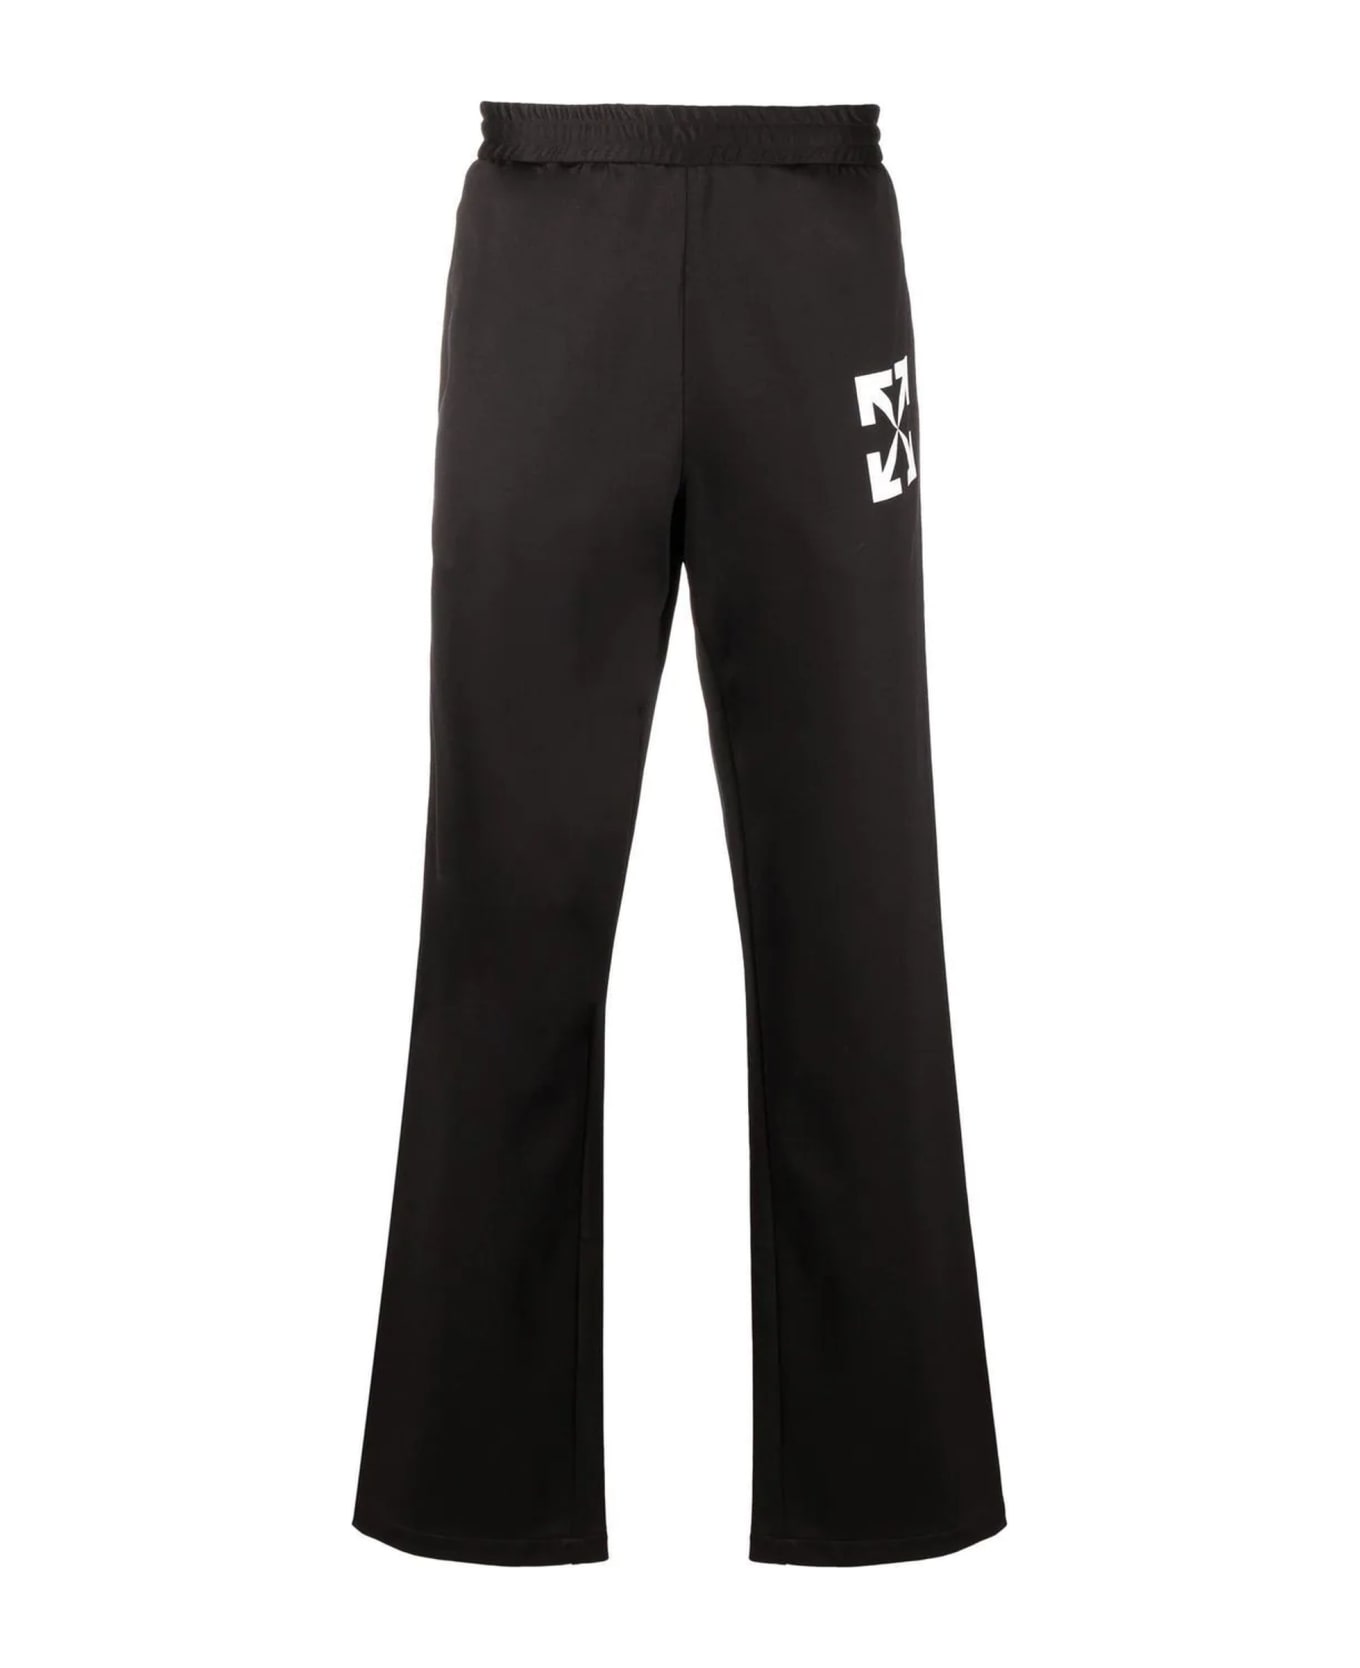 Off-White Track Trousers - Black White ボトムス